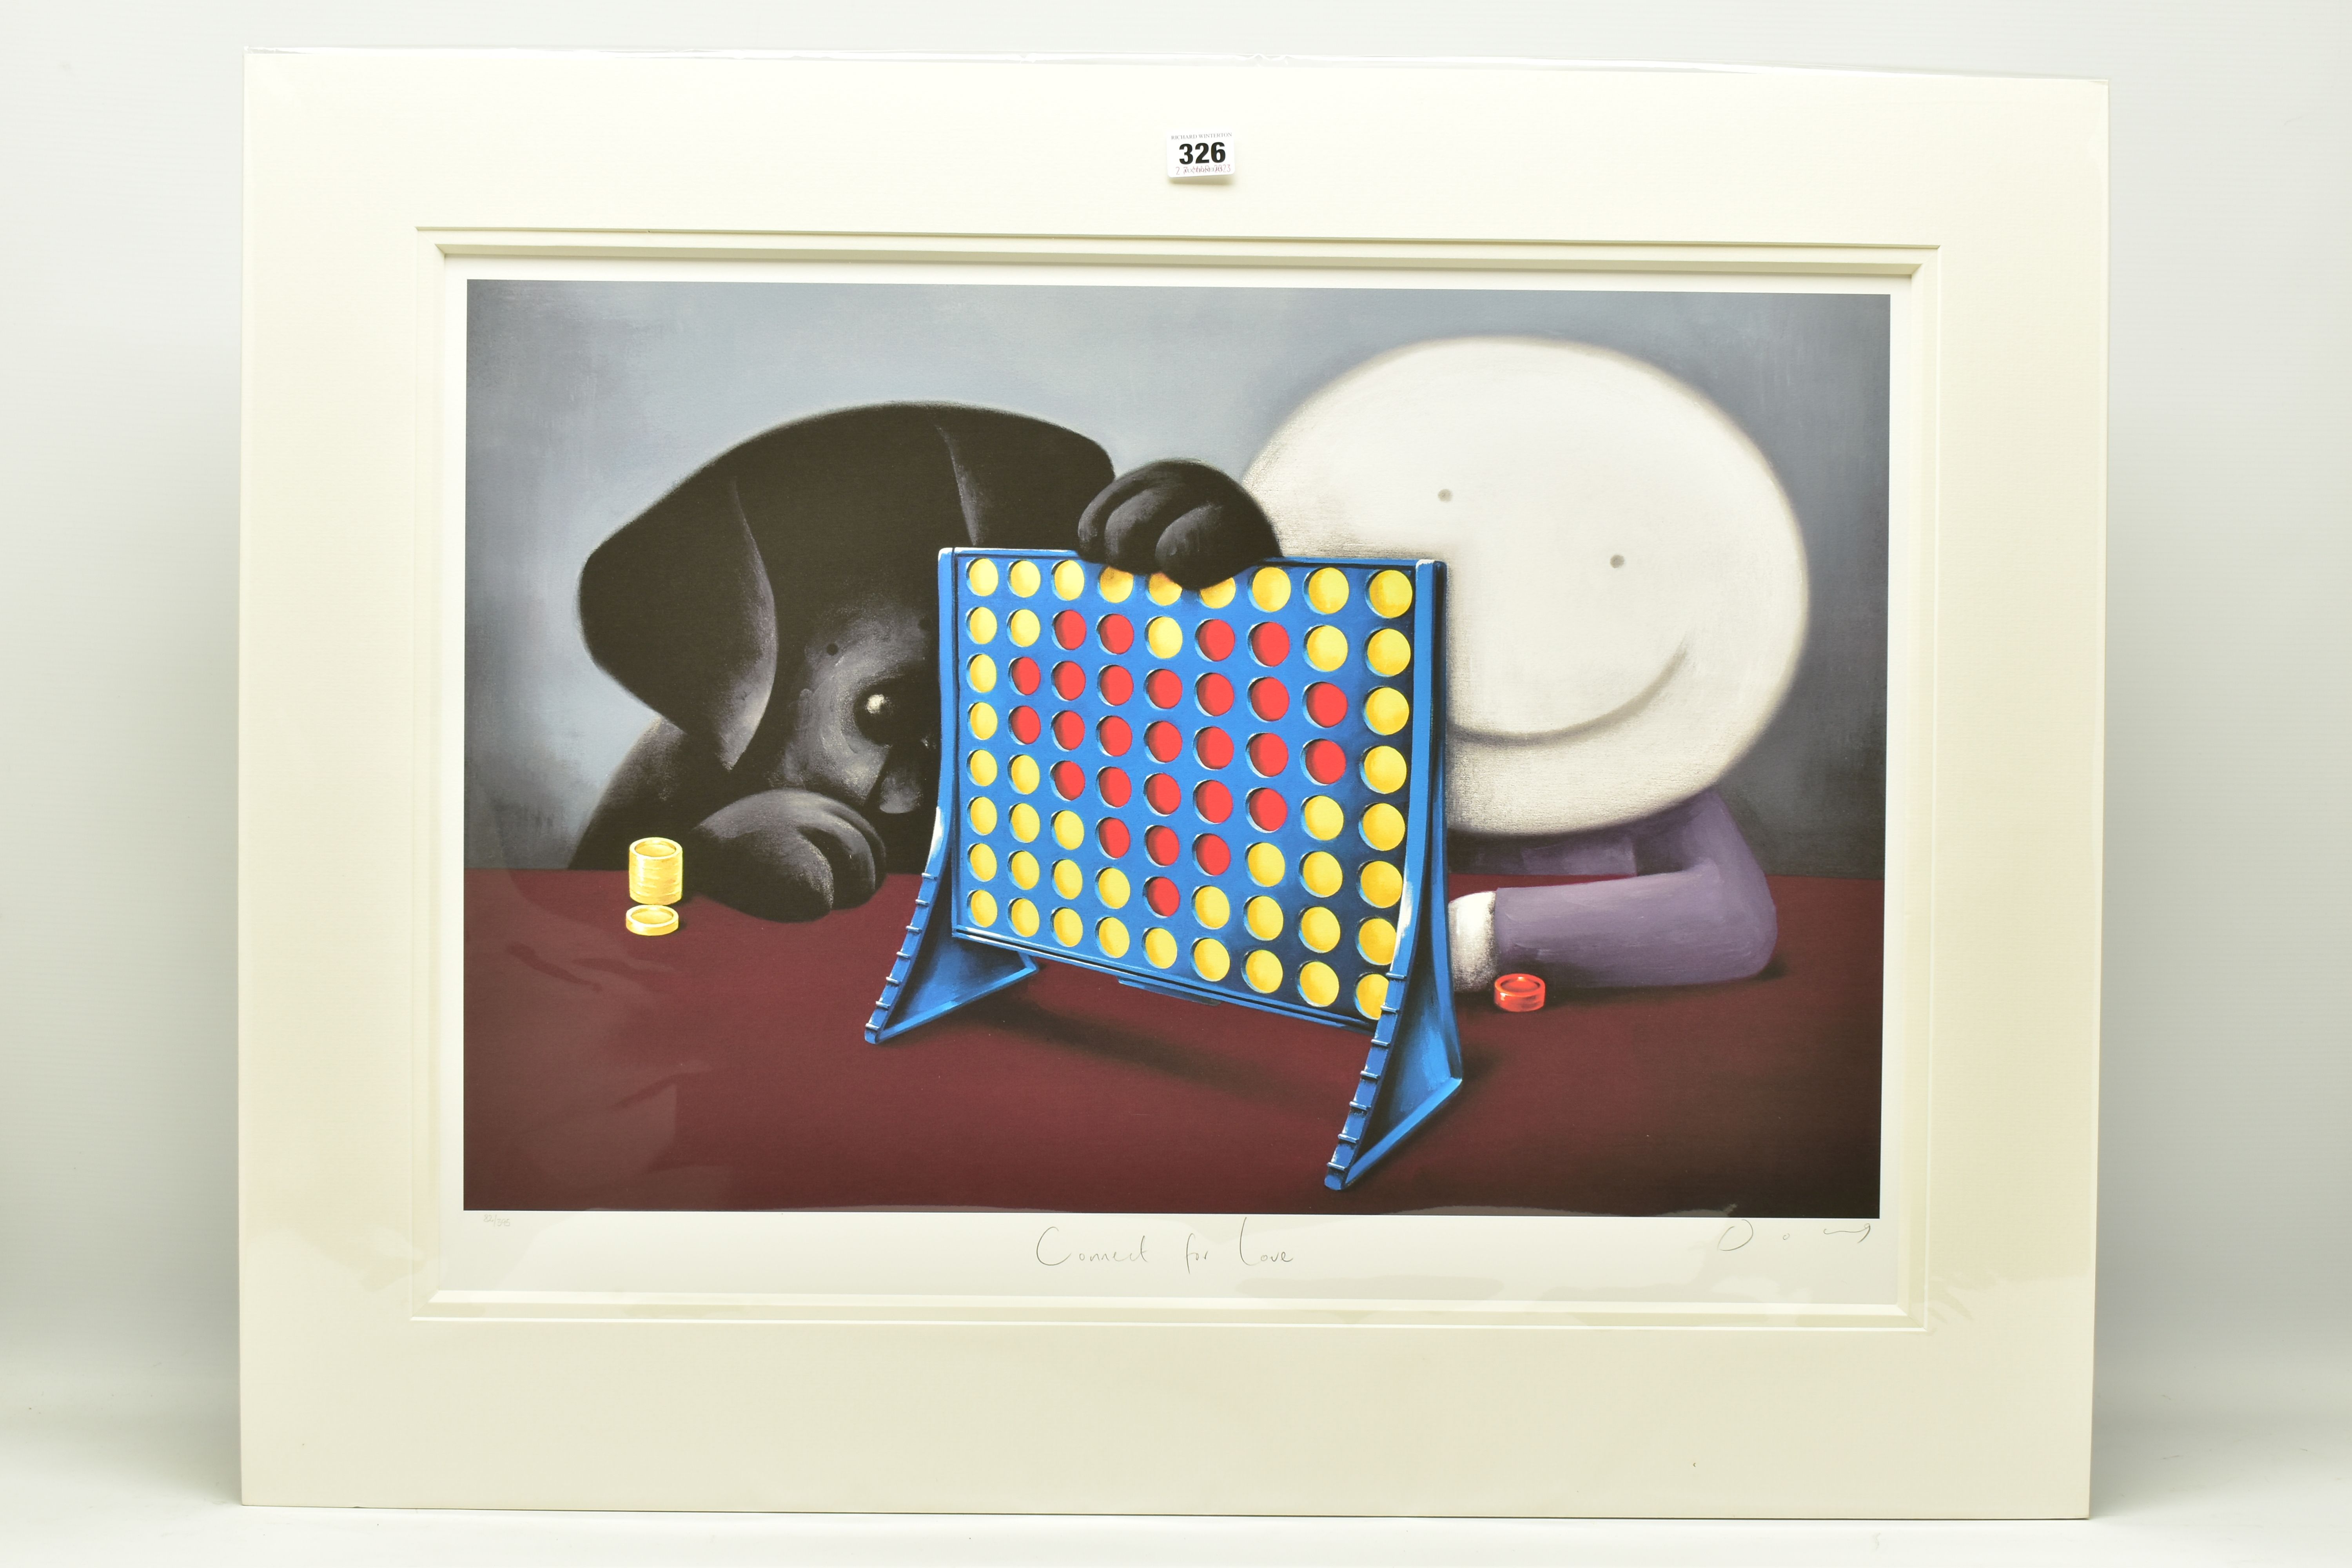 DOUG HYDE (BRITISH 1972) 'CONNECT FOR LOVE', a signed limited edition print on paper depicting a